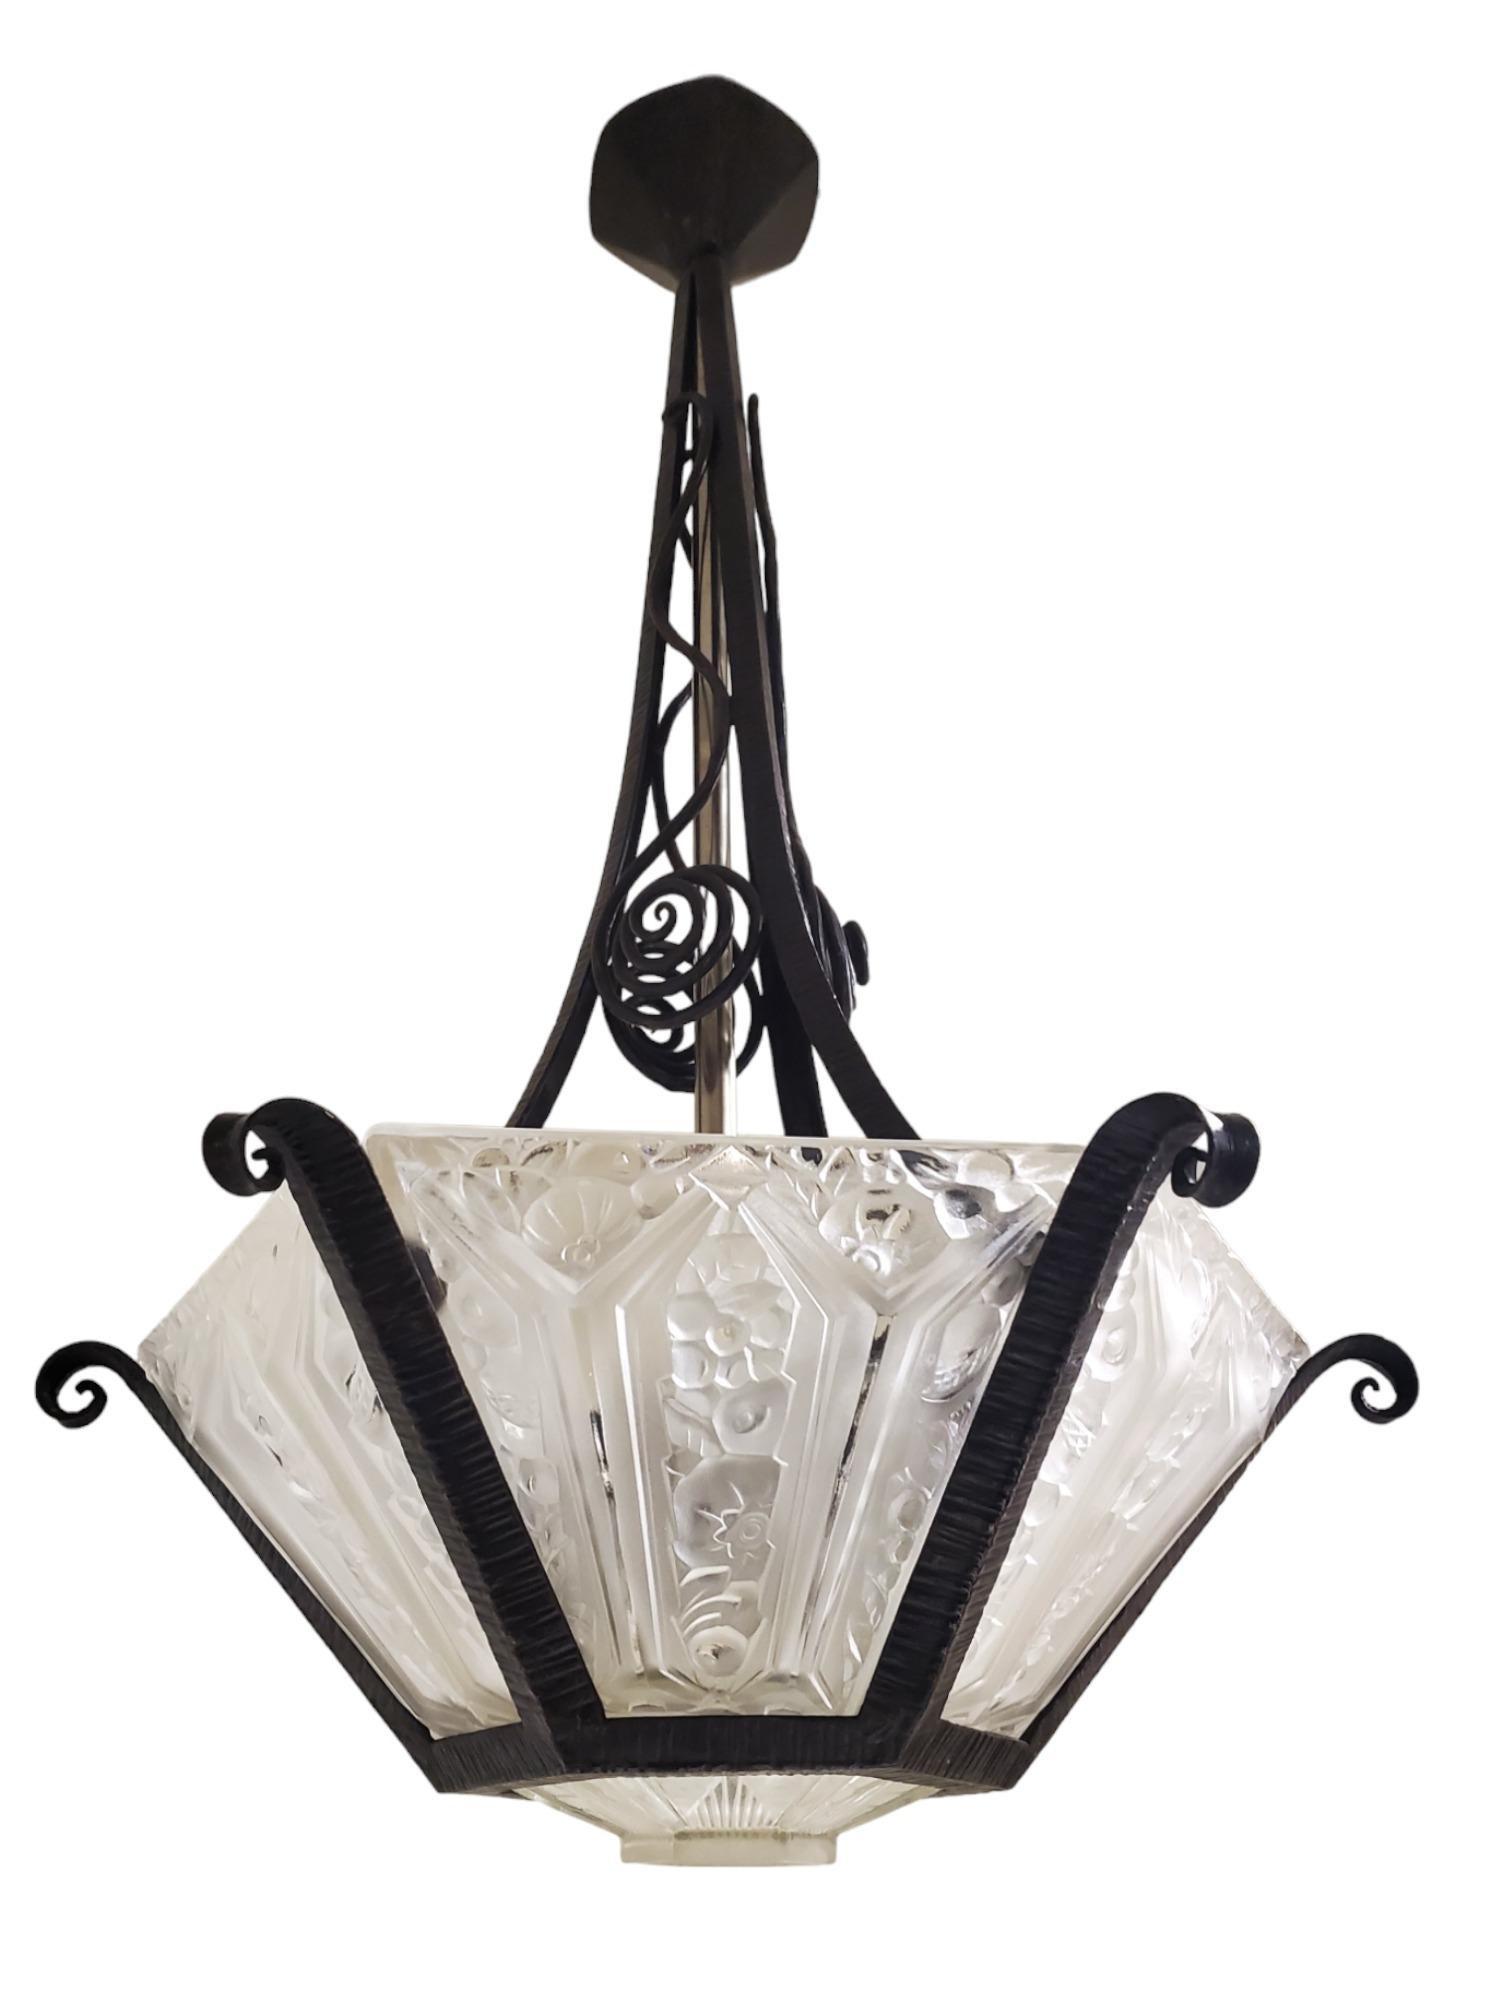 Hand forged Iron +glass French Art Deco chandelier w/ scroll + flowers by Hanots For Sale 5